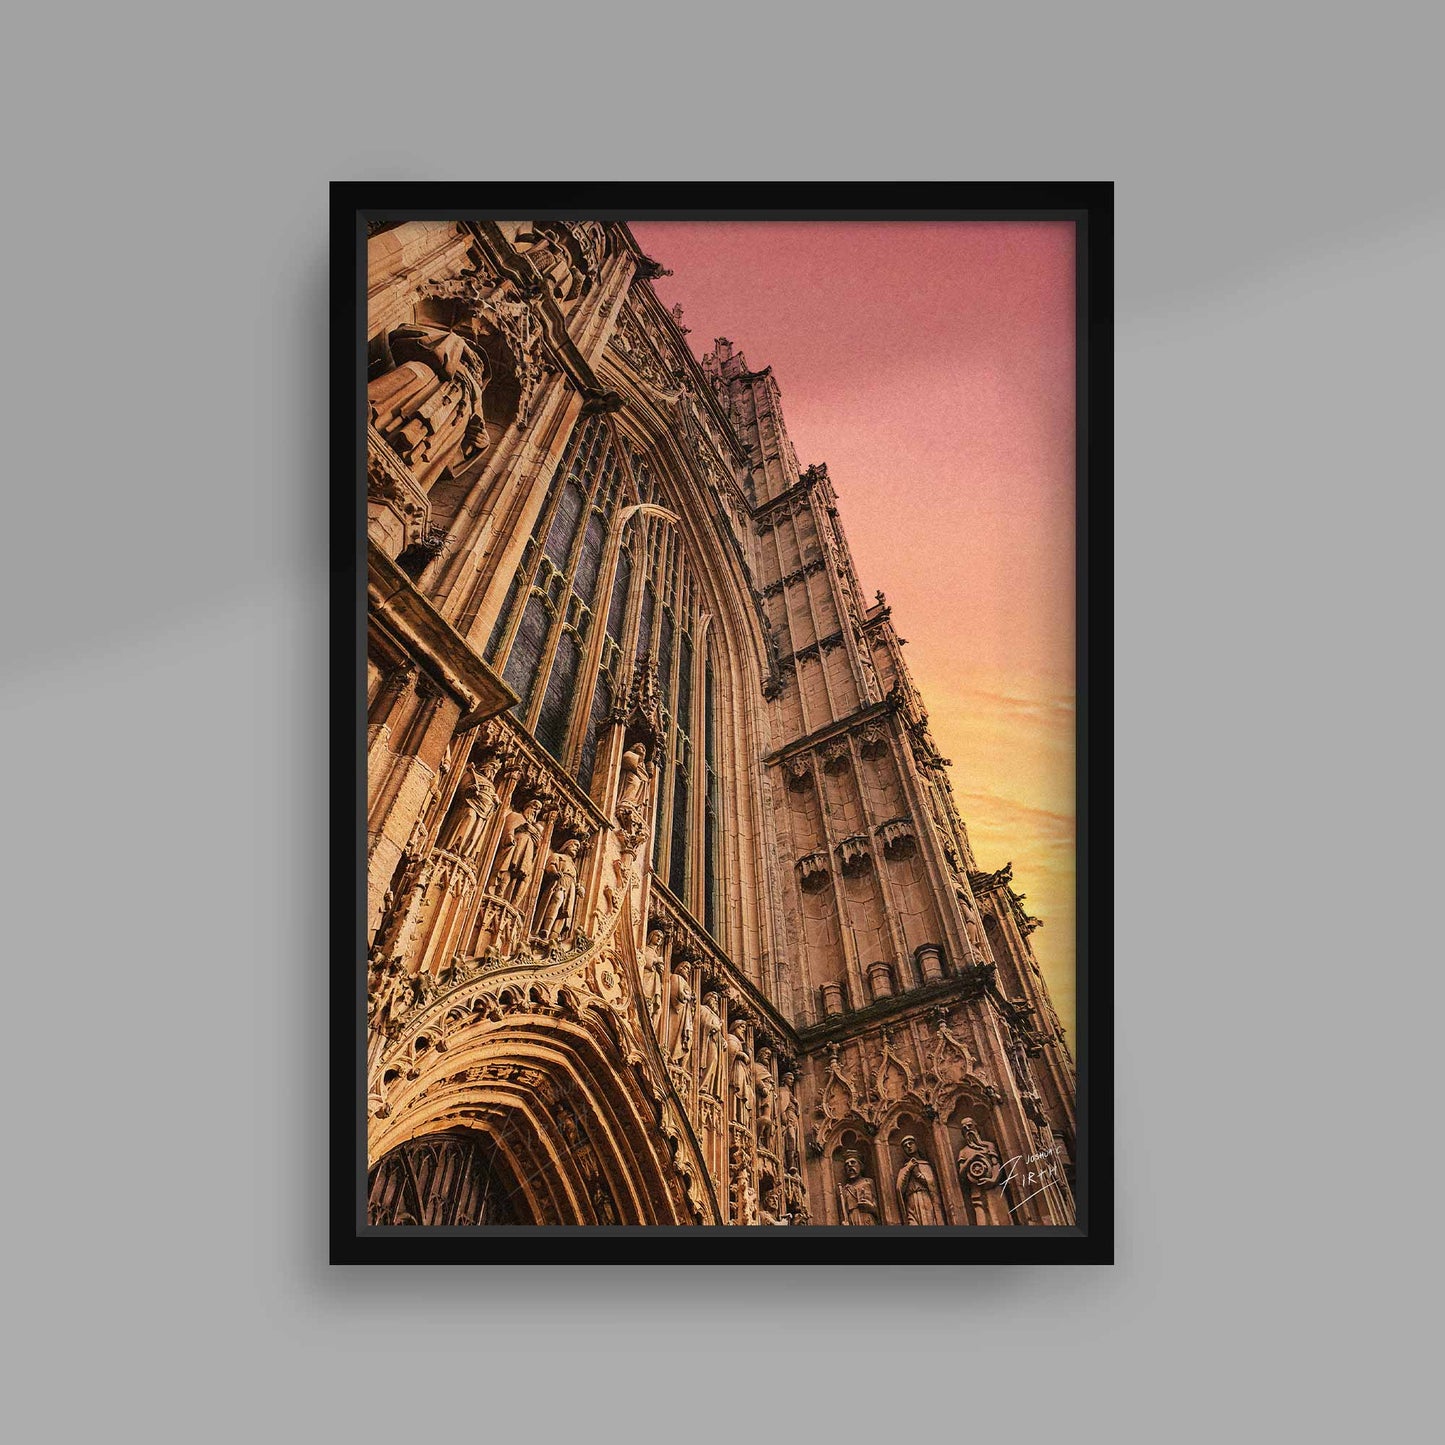 Beverley Minster up close photograph. Anglican Church in Beverley, East Riding of Yorkshire